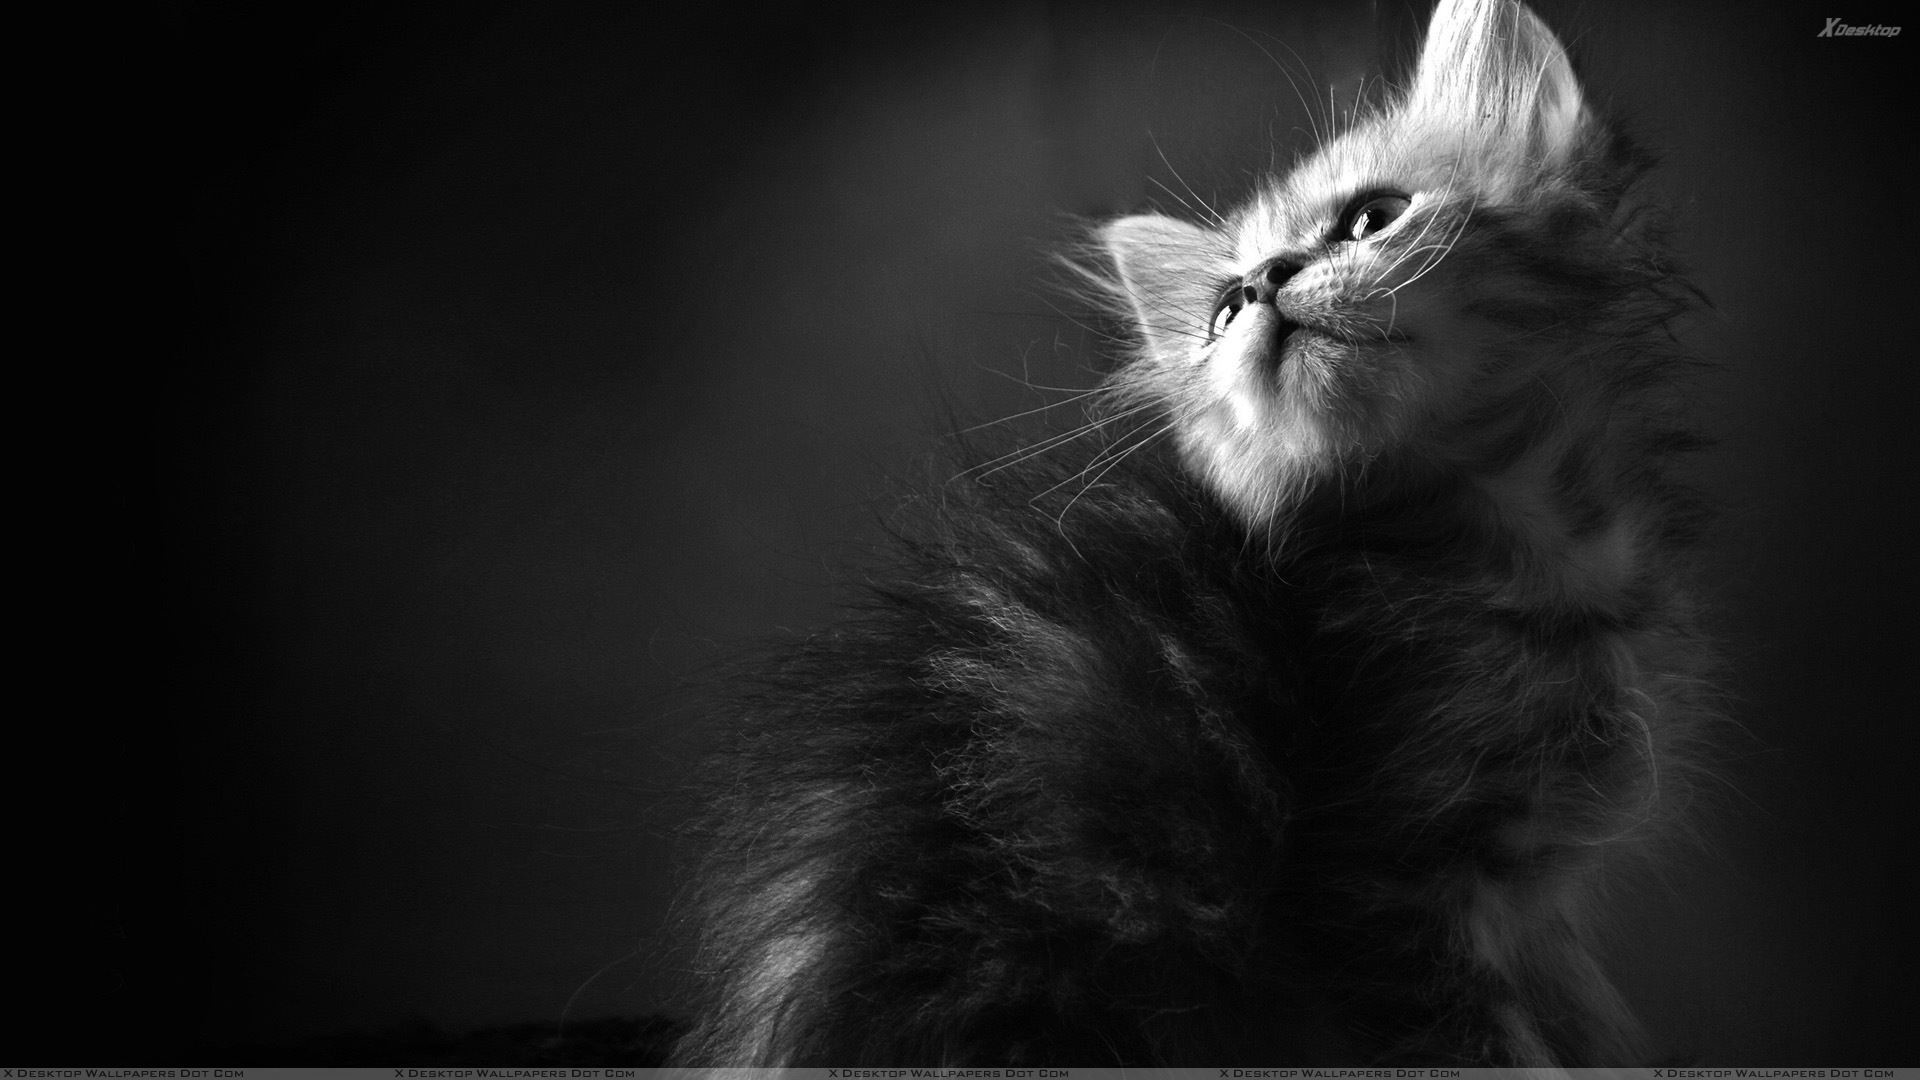 You are viewing wallpaper titled "Black N White Cat ... 1920x1080